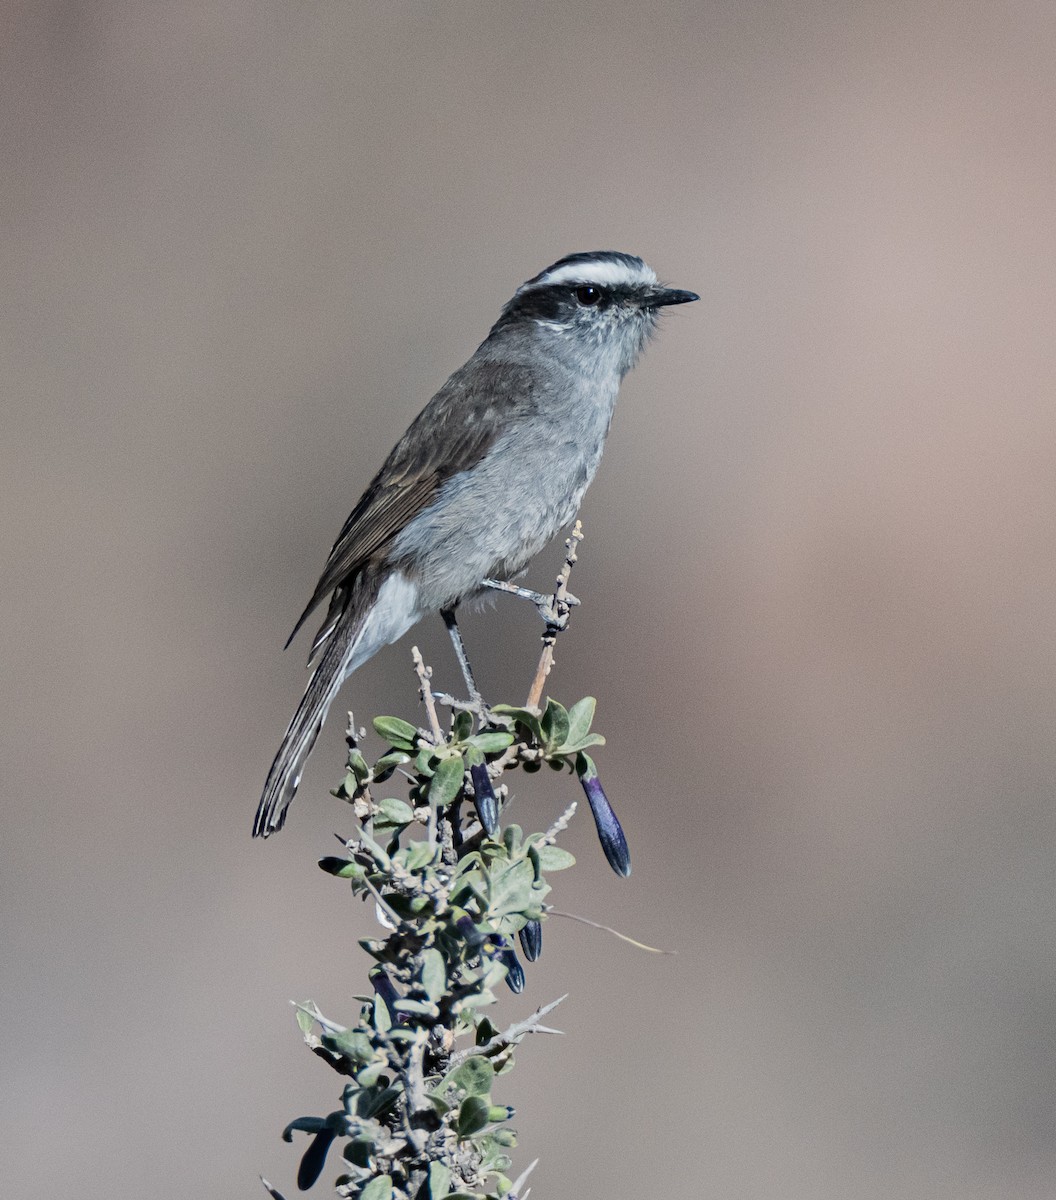 White-browed Chat-Tyrant - miguel sepulveda